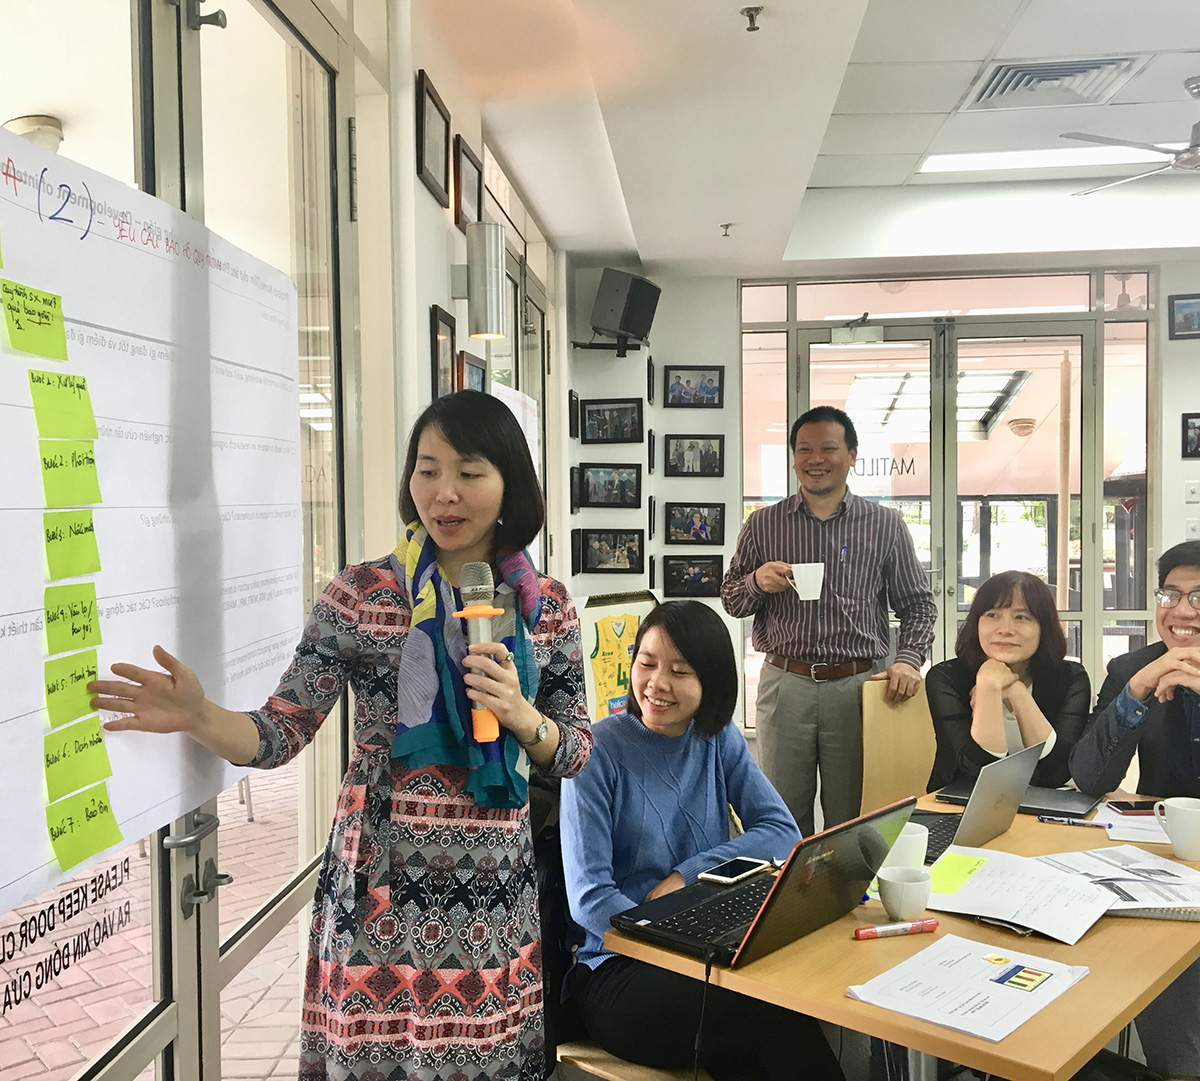 <strong>Capacity Building – </strong>Training programs are building skills, experience and institutional knowledge for universities and research institutes.